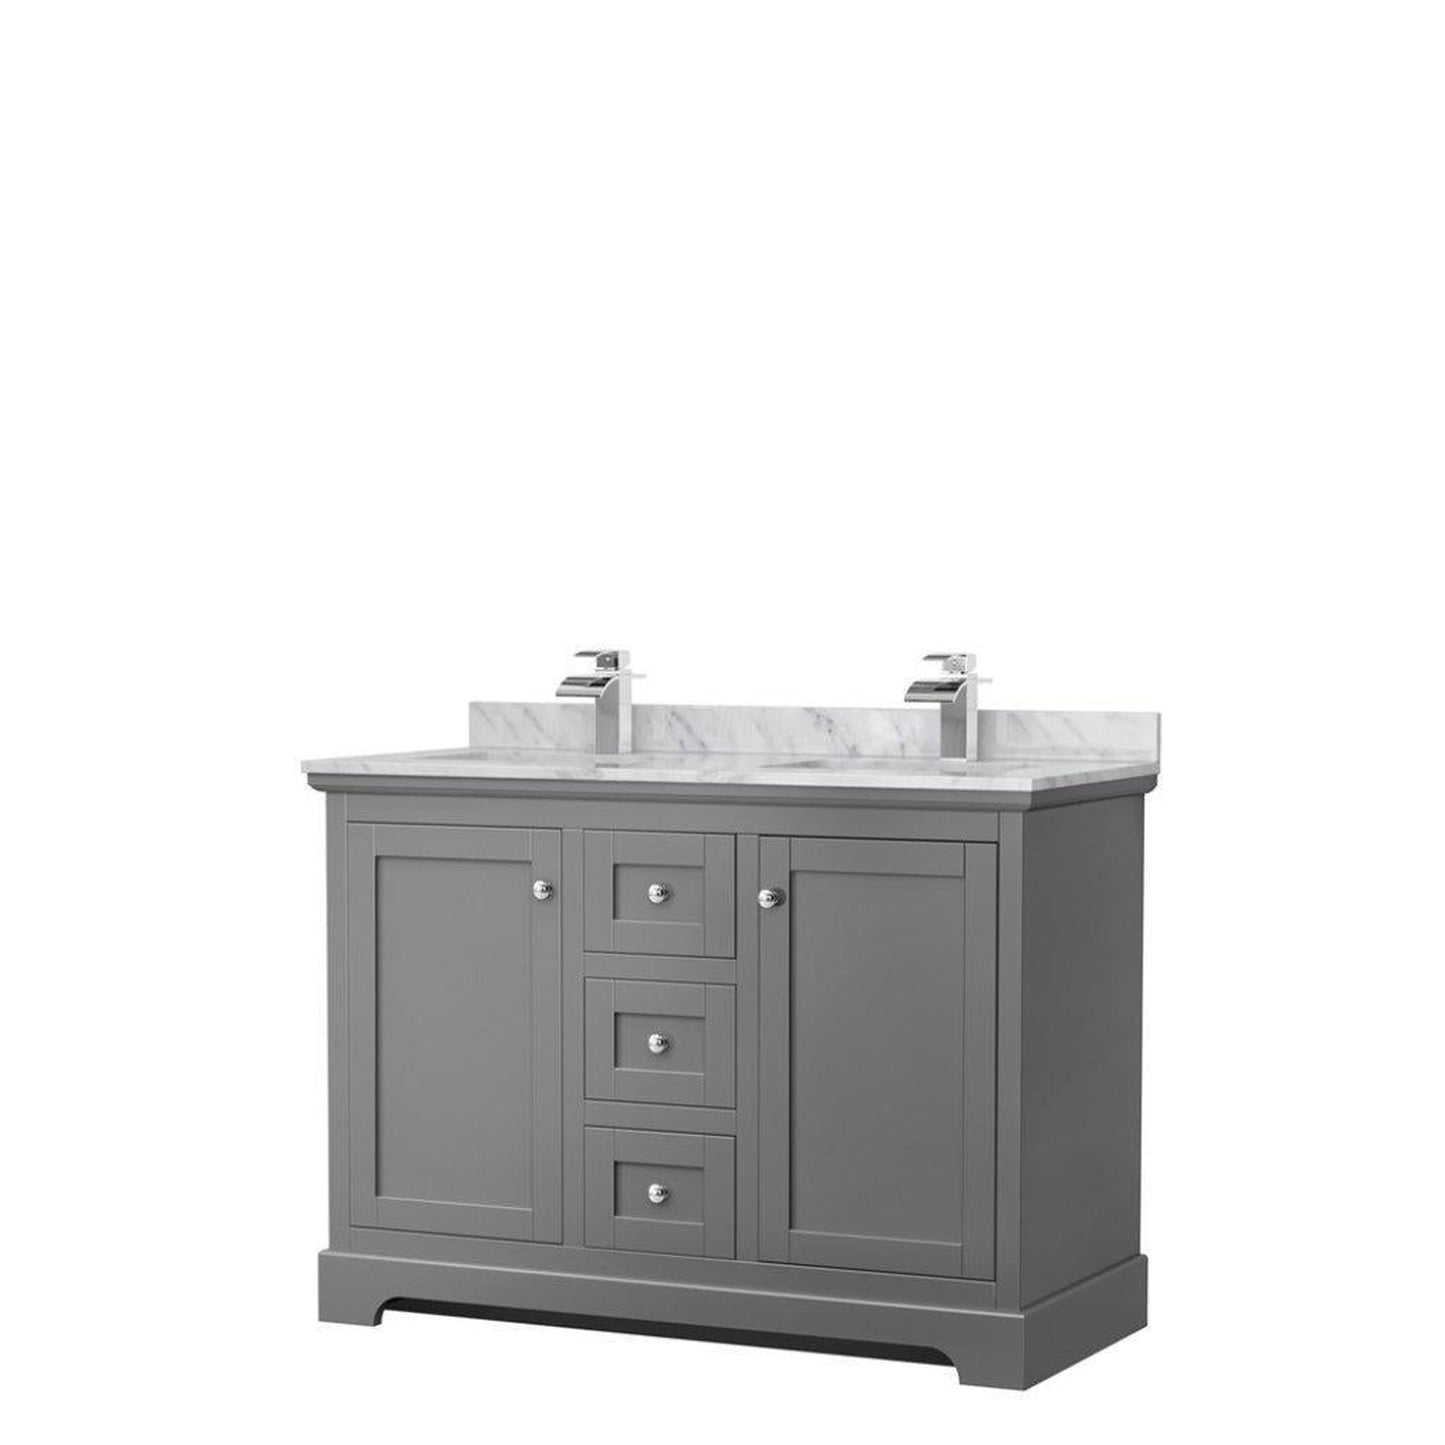 Wyndham Collection Avery 48" Dark Gray Double Bathroom Vanity With White Carrara Marble Countertop With 1-Hole Faucet And Square Sink